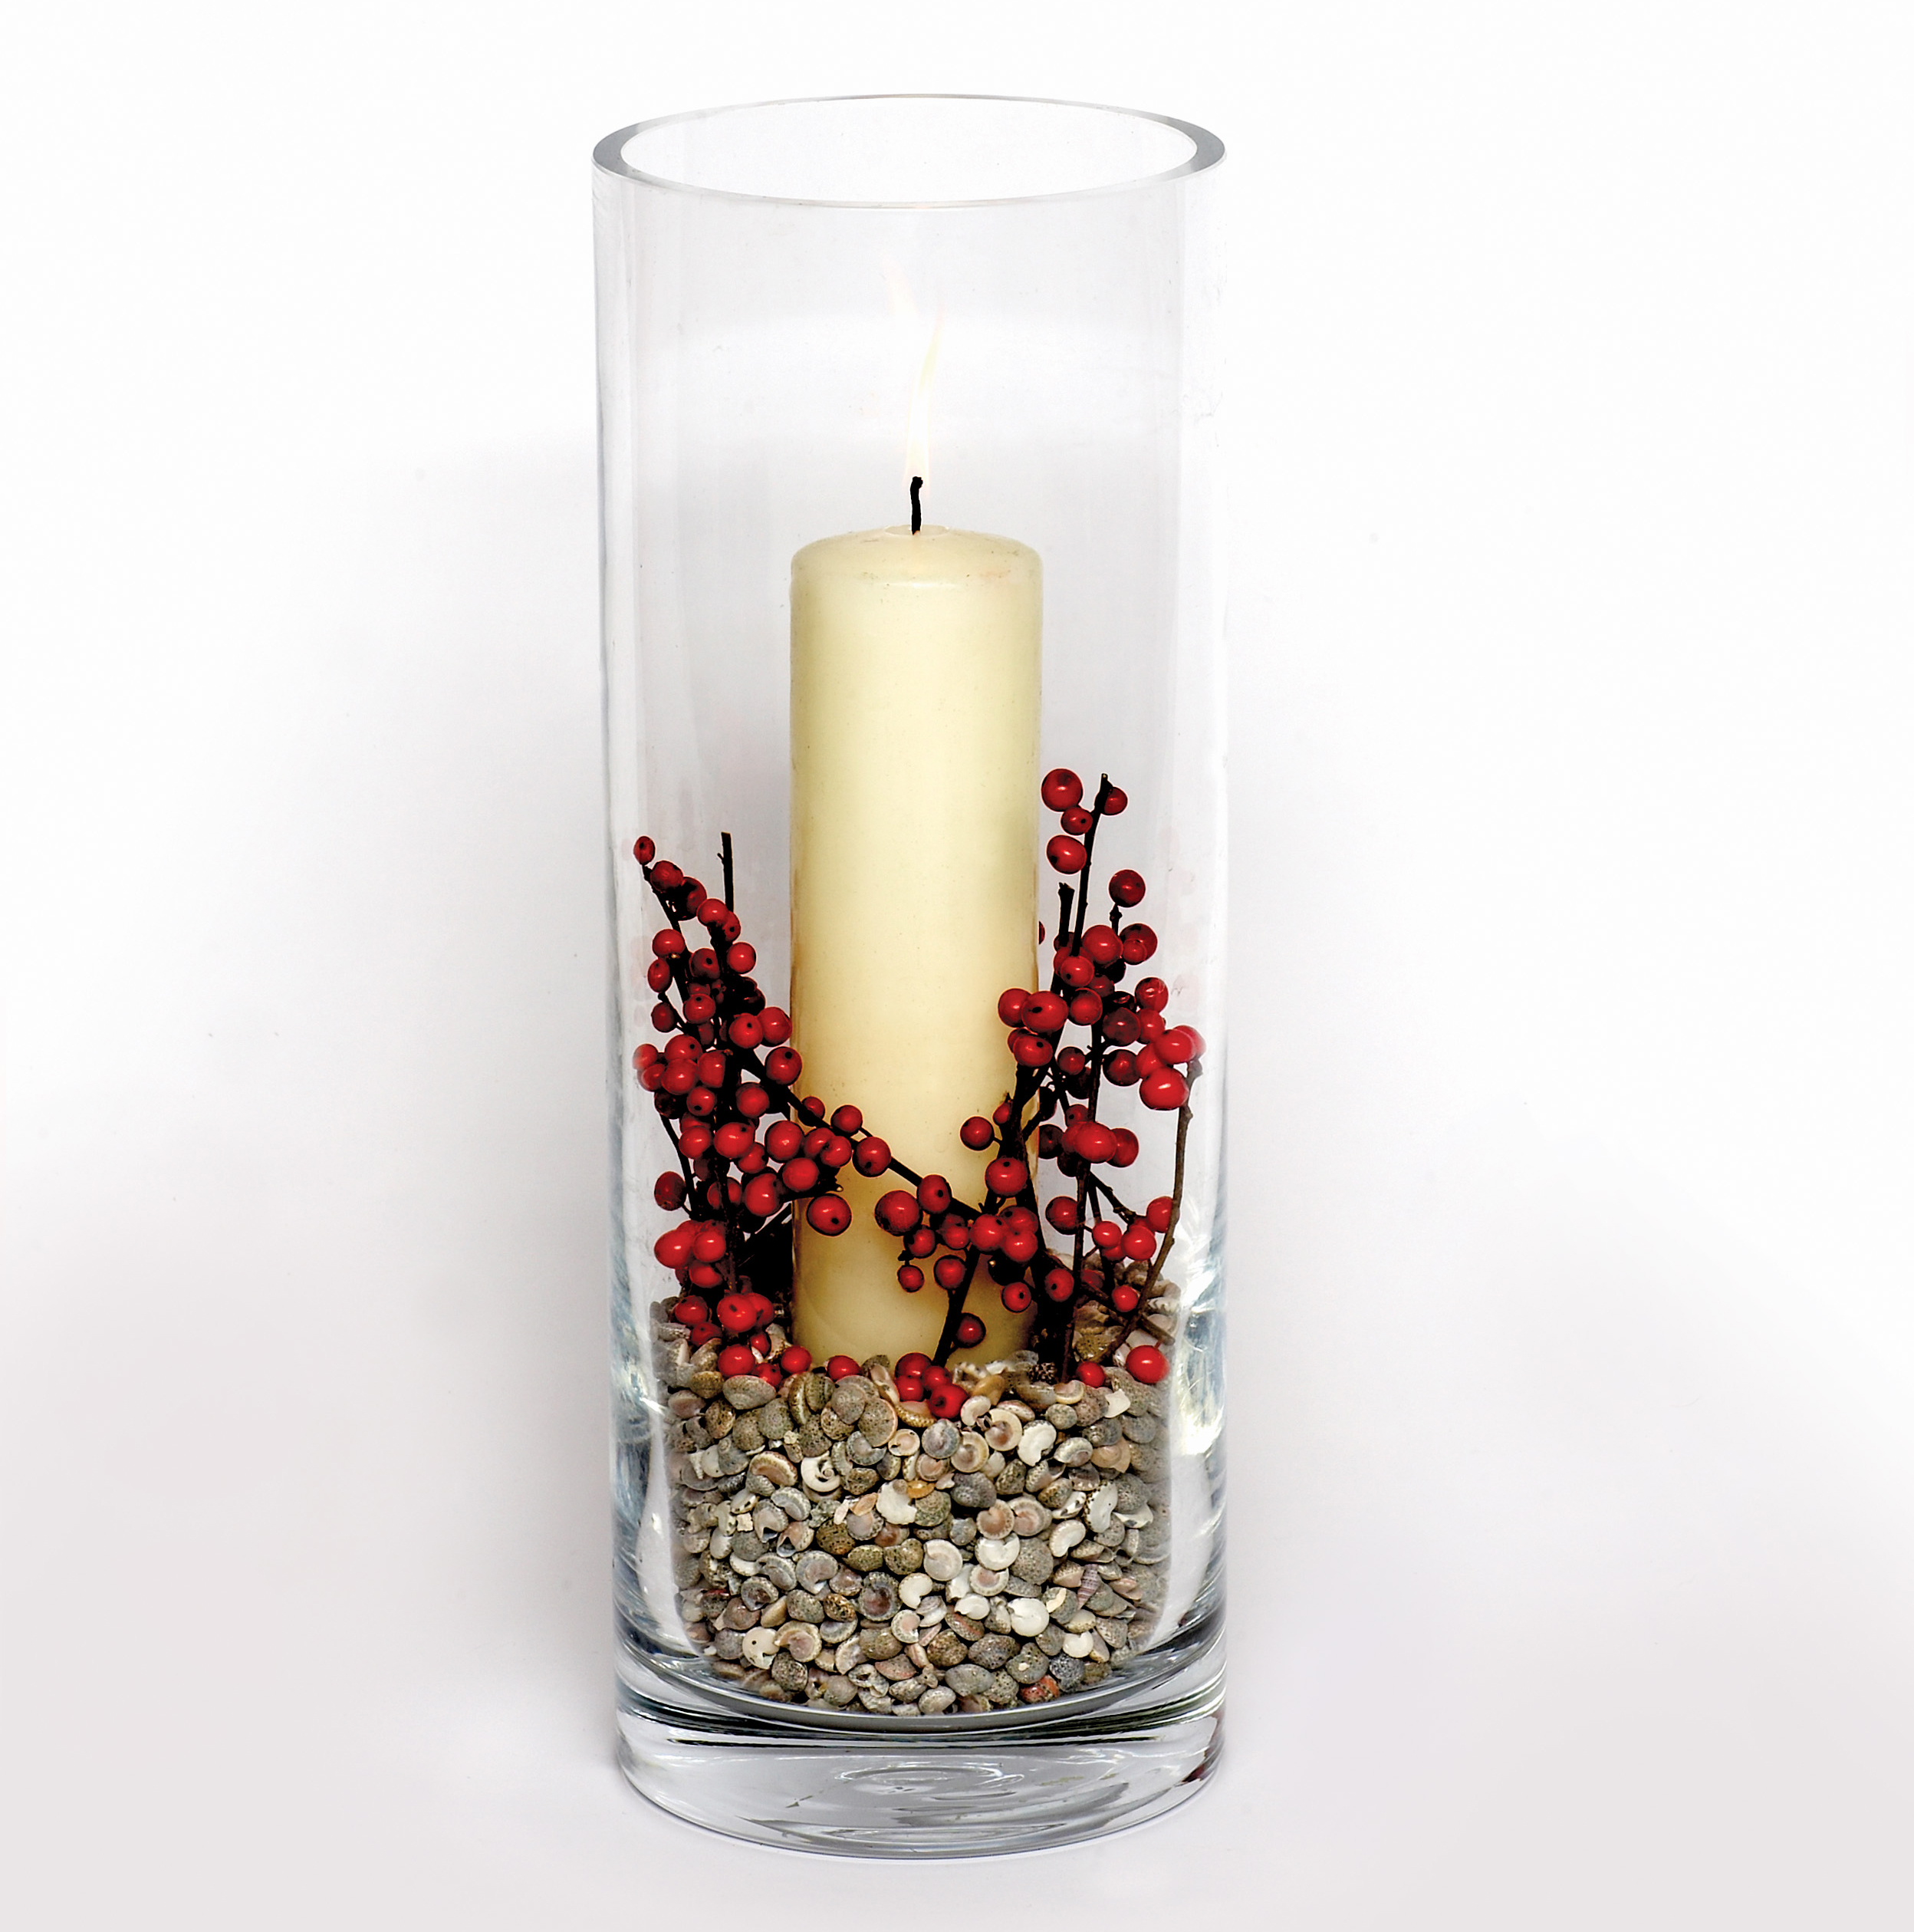 Glass vase with red berries, shells and church candle (Judith blacklock/PA)